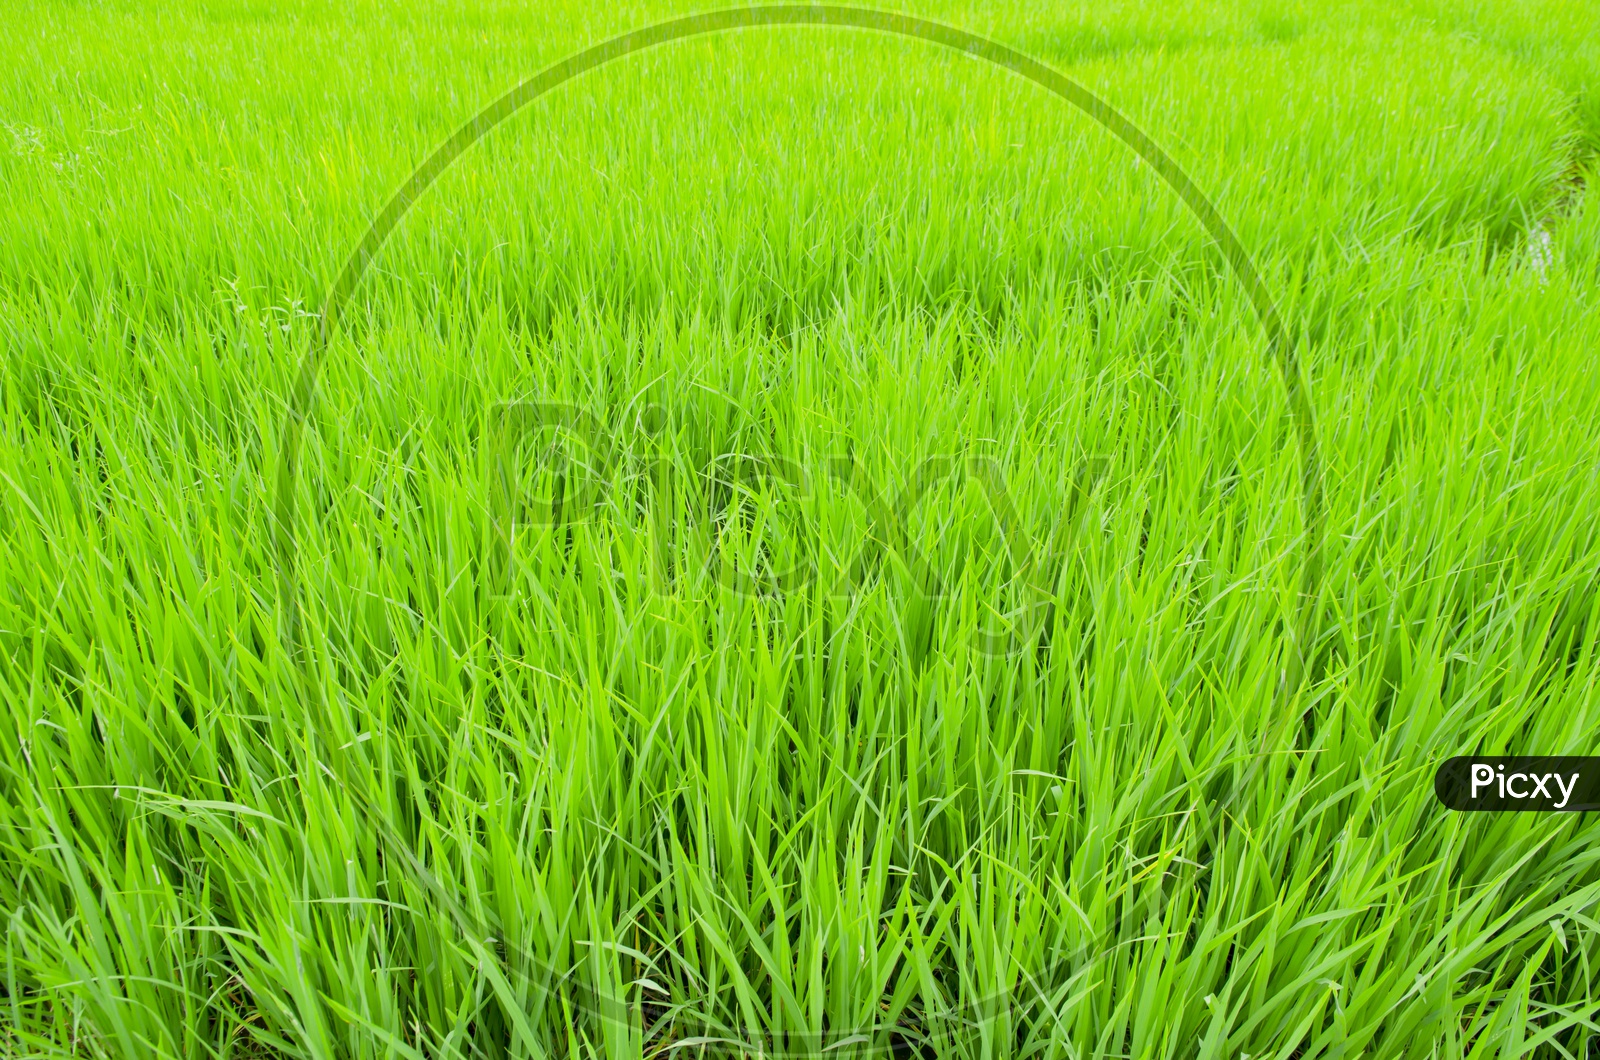 Rice Or Paddy Spikelets In a Paddy Farm Field